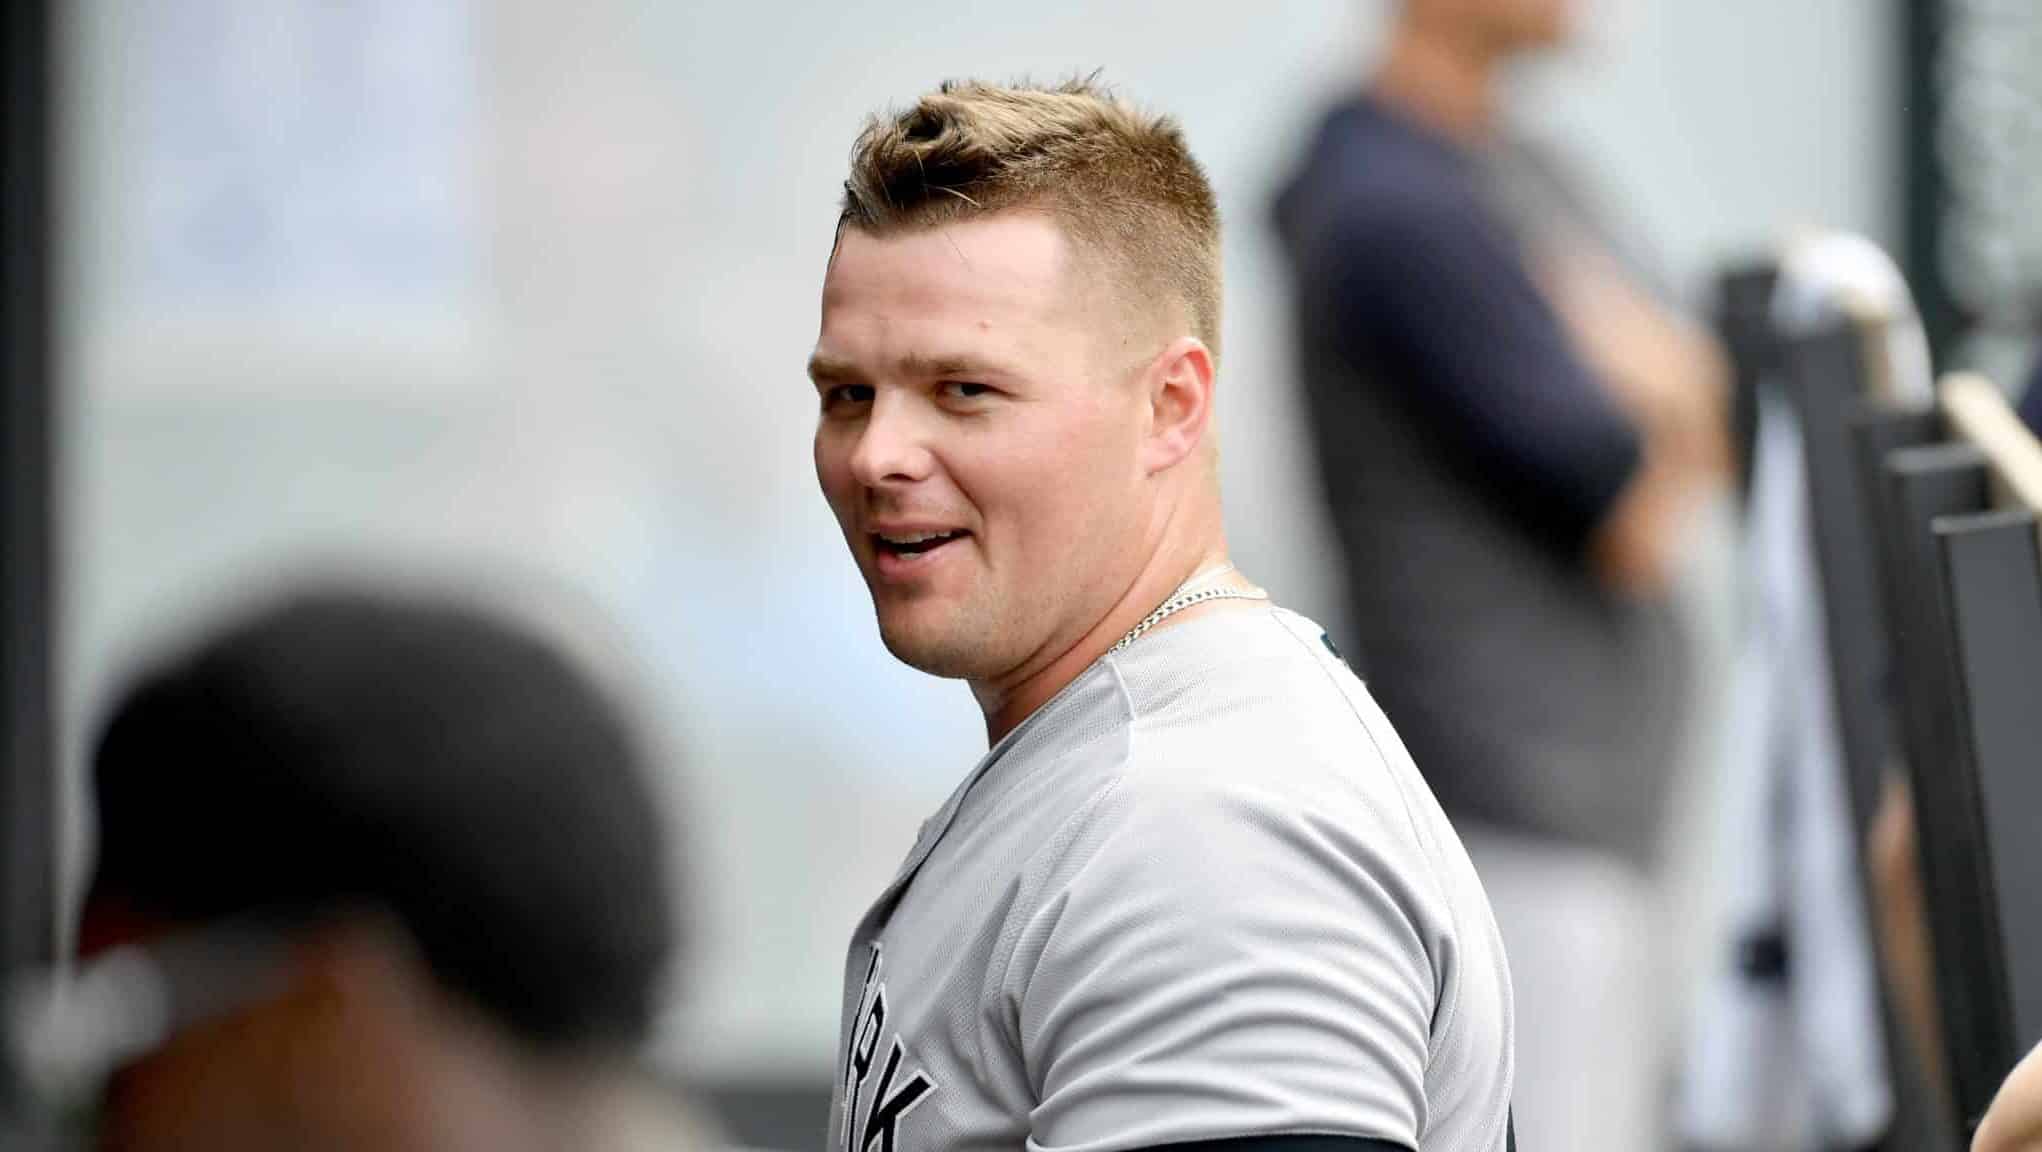 CLEVELAND, OHIO - JUNE 09: Luke Voit #45 of the New York Yankees celebrates after scoring on a sacrifice fly by Clint Frazier #77 to take the lead against the Cleveland Indians during the ninth inning at Progressive Field on June 09, 2019 in Cleveland, Ohio.